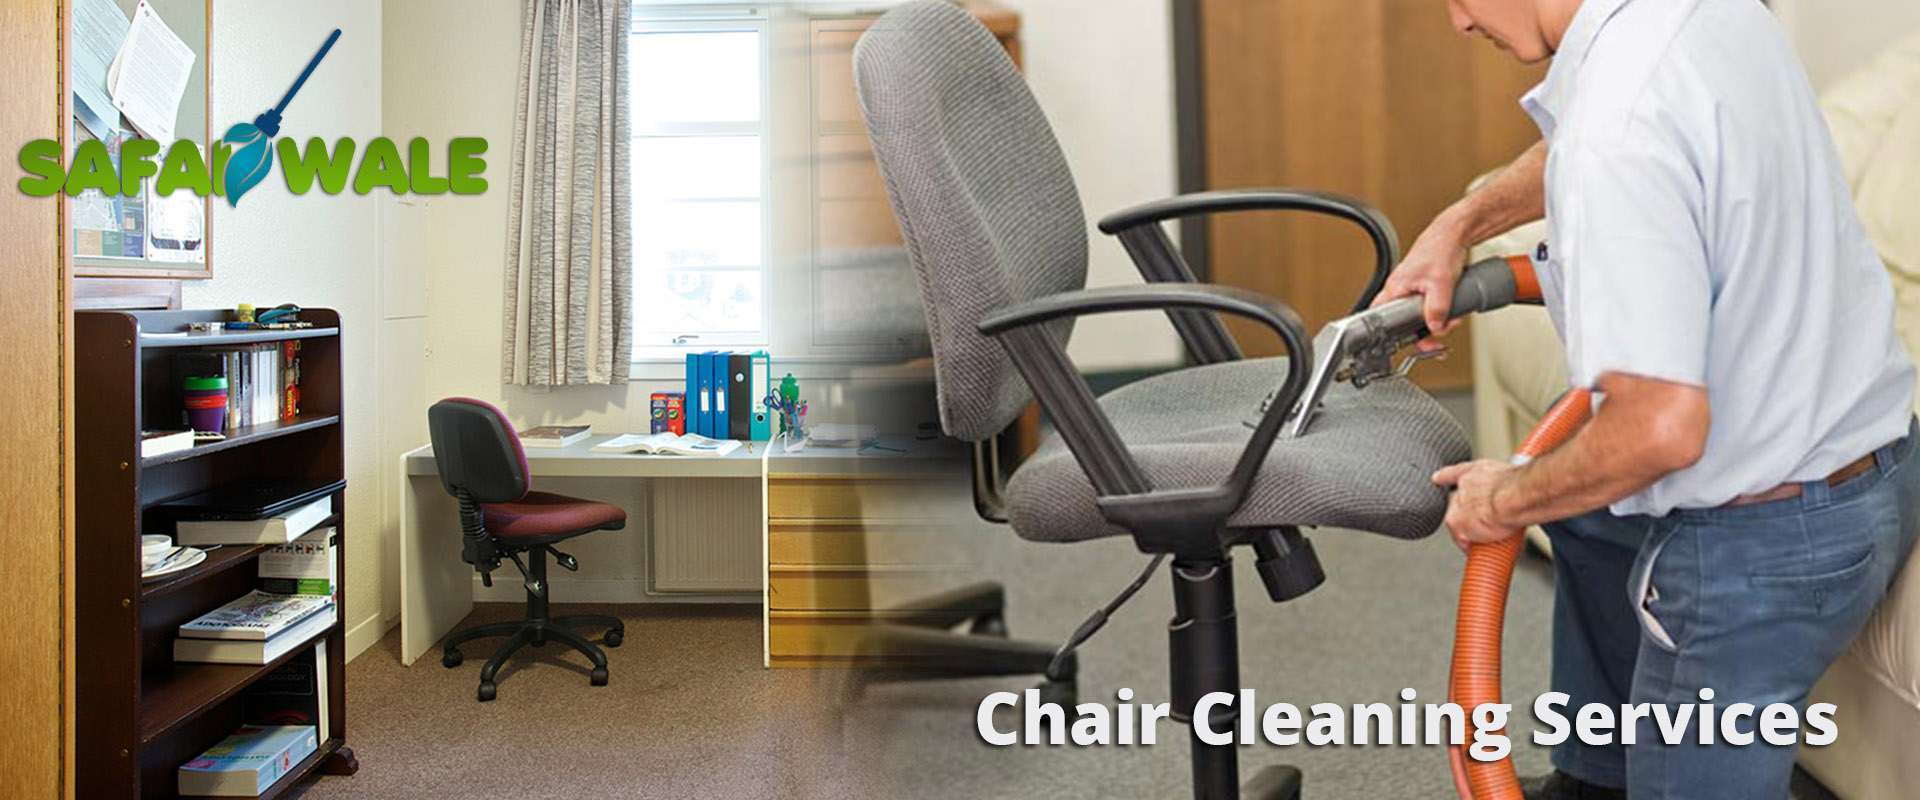 chair cleaning services in kaushambi